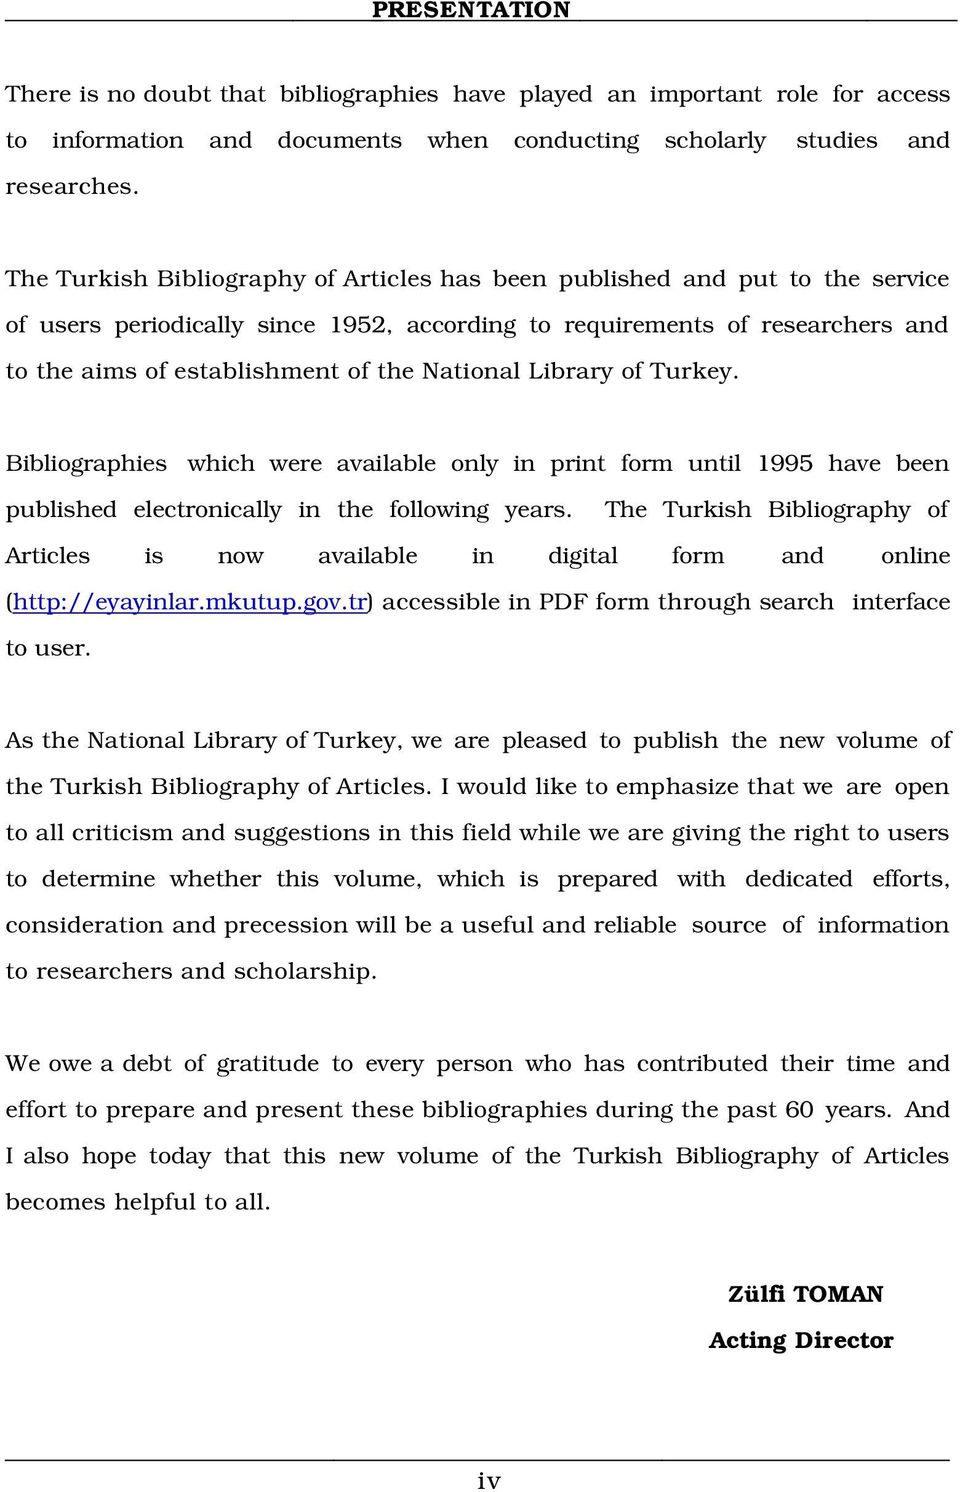 National Library of Turkey. Bibliographies which were available only in print form until 1995 have been published electronically in the following years.